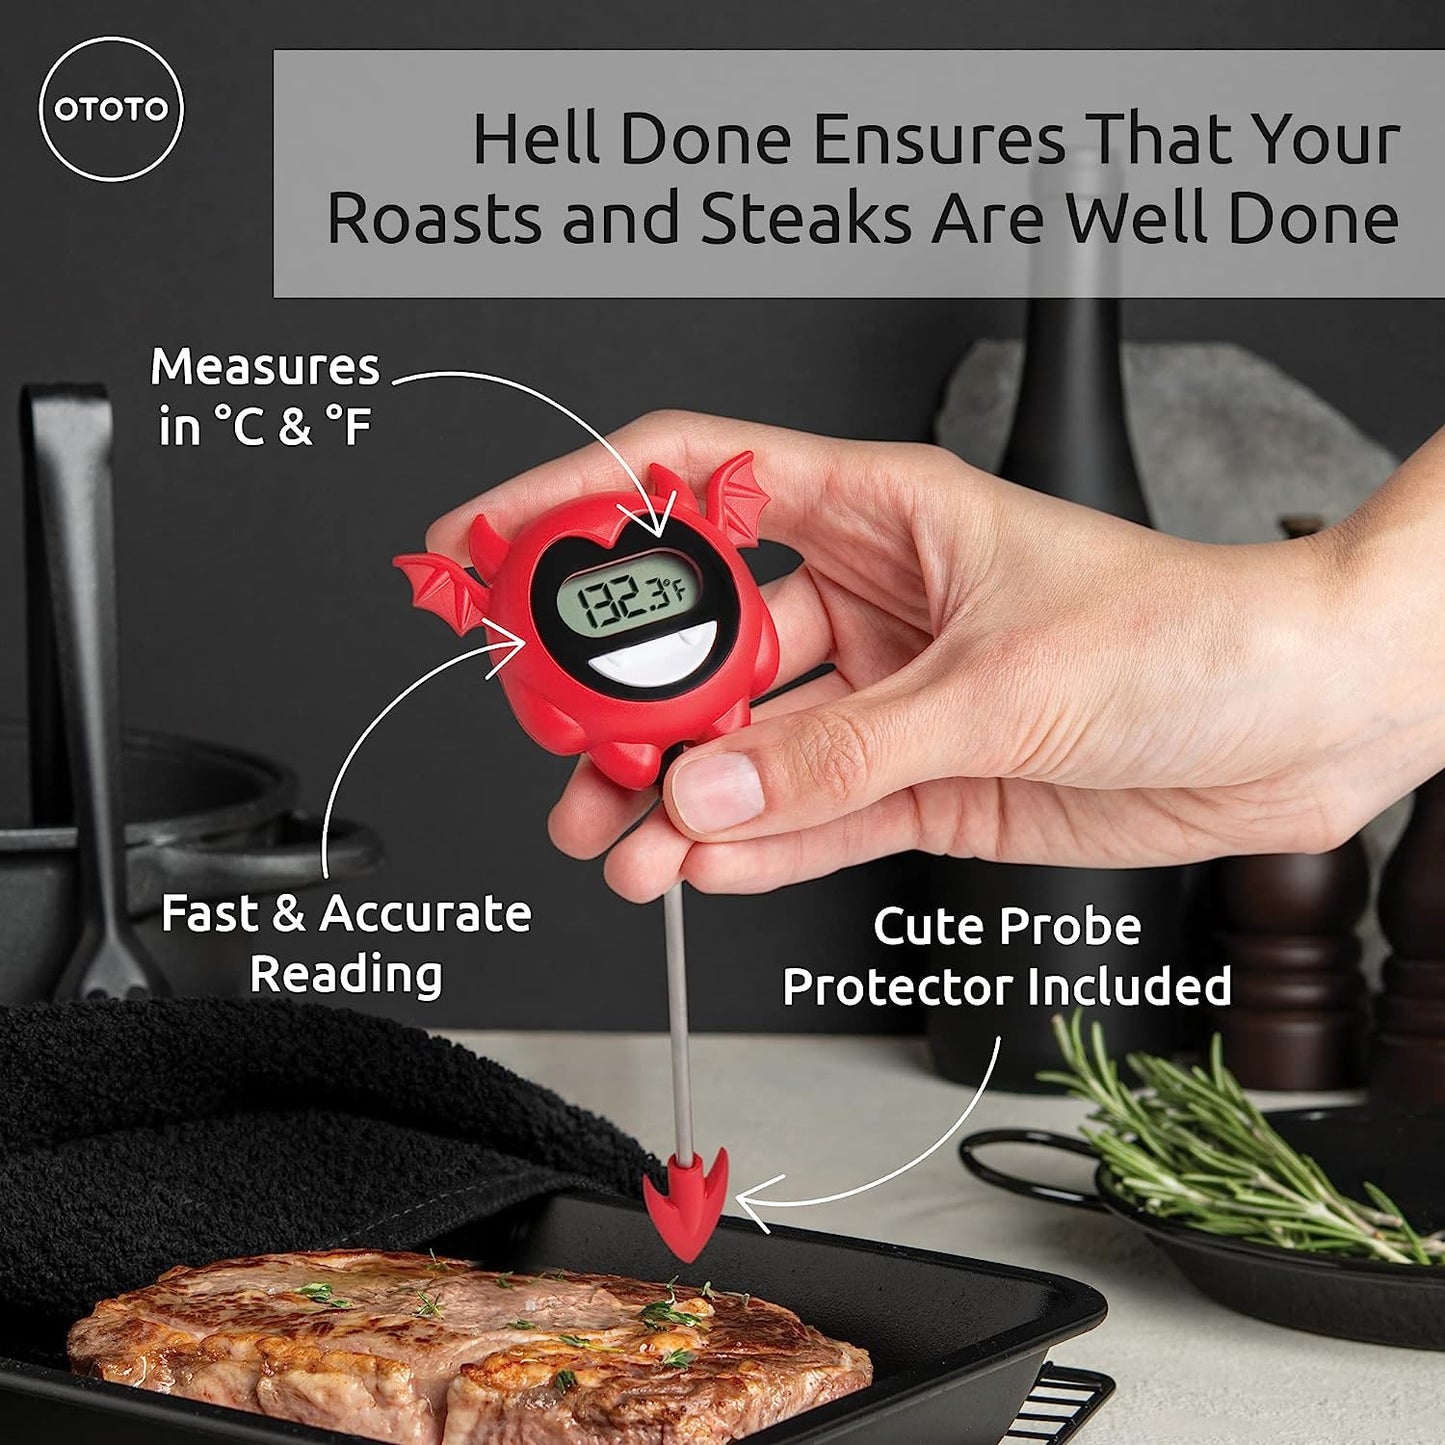 A hand is holding a meat thermometer over a steak in a frying pan.